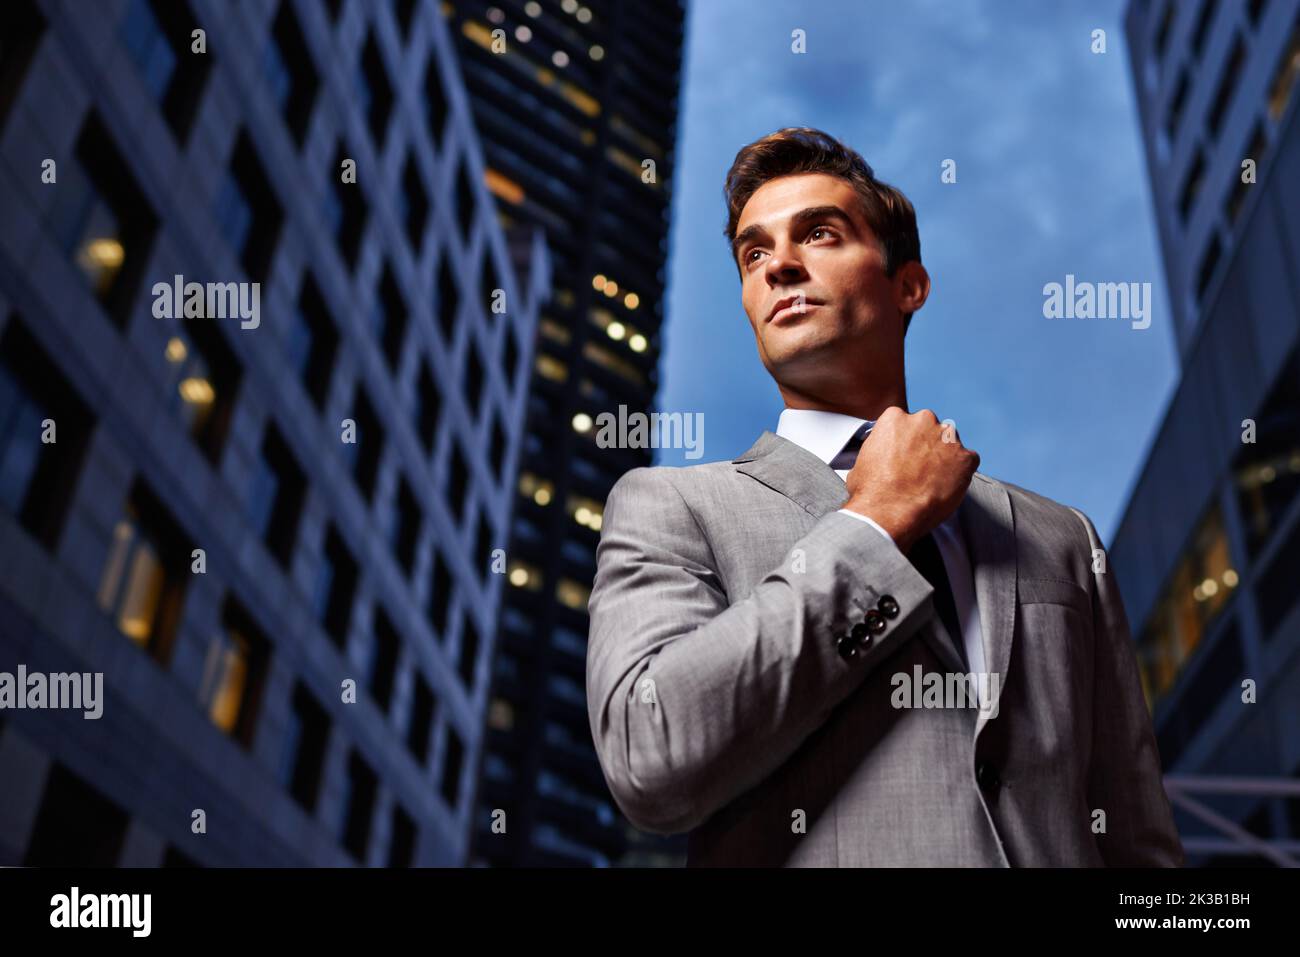 Twilight business style. a handsome businessman in a suit standing in a city setting at night. Stock Photo